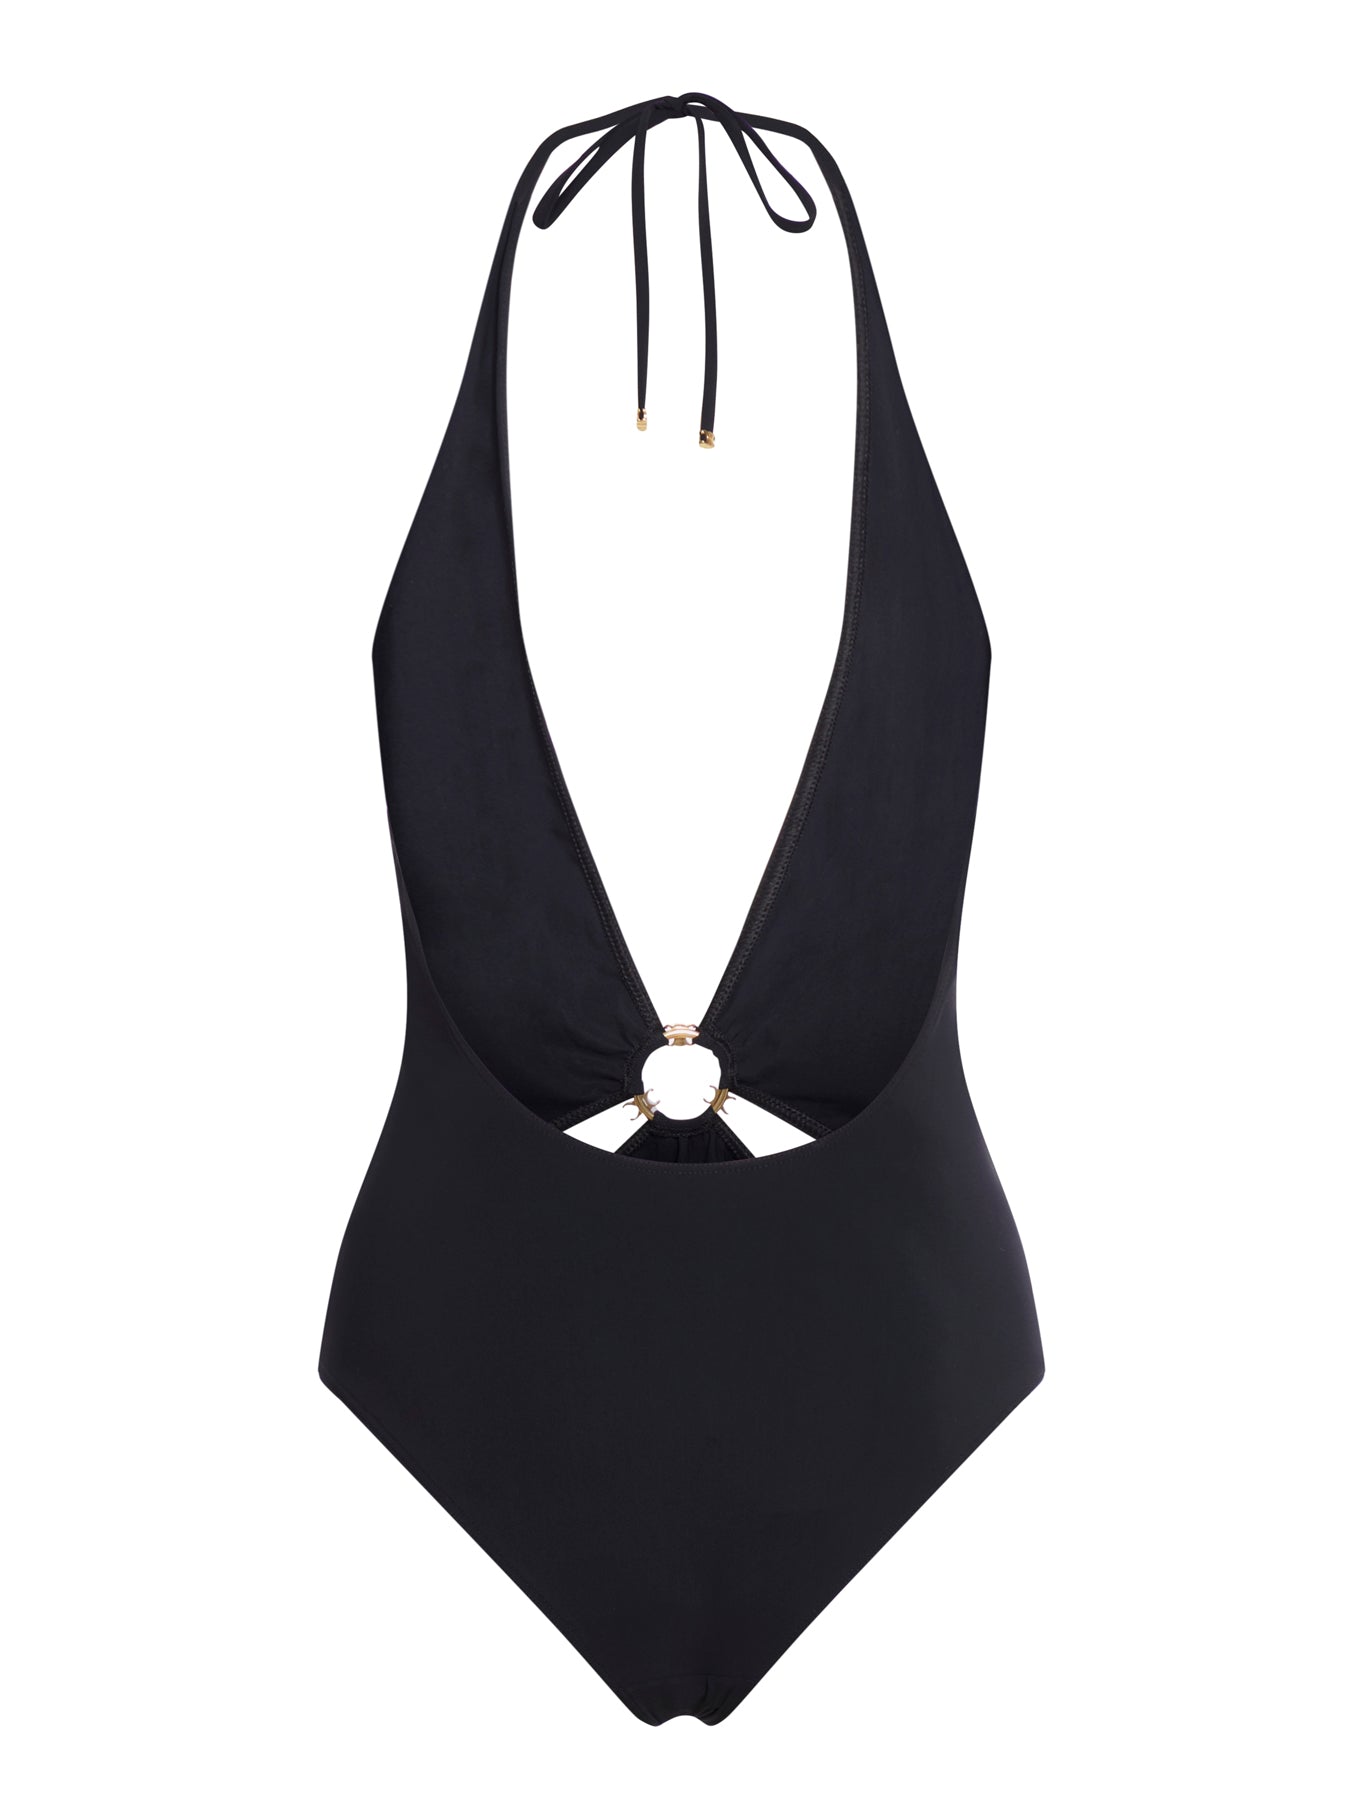 swimsuit with cut out inserts